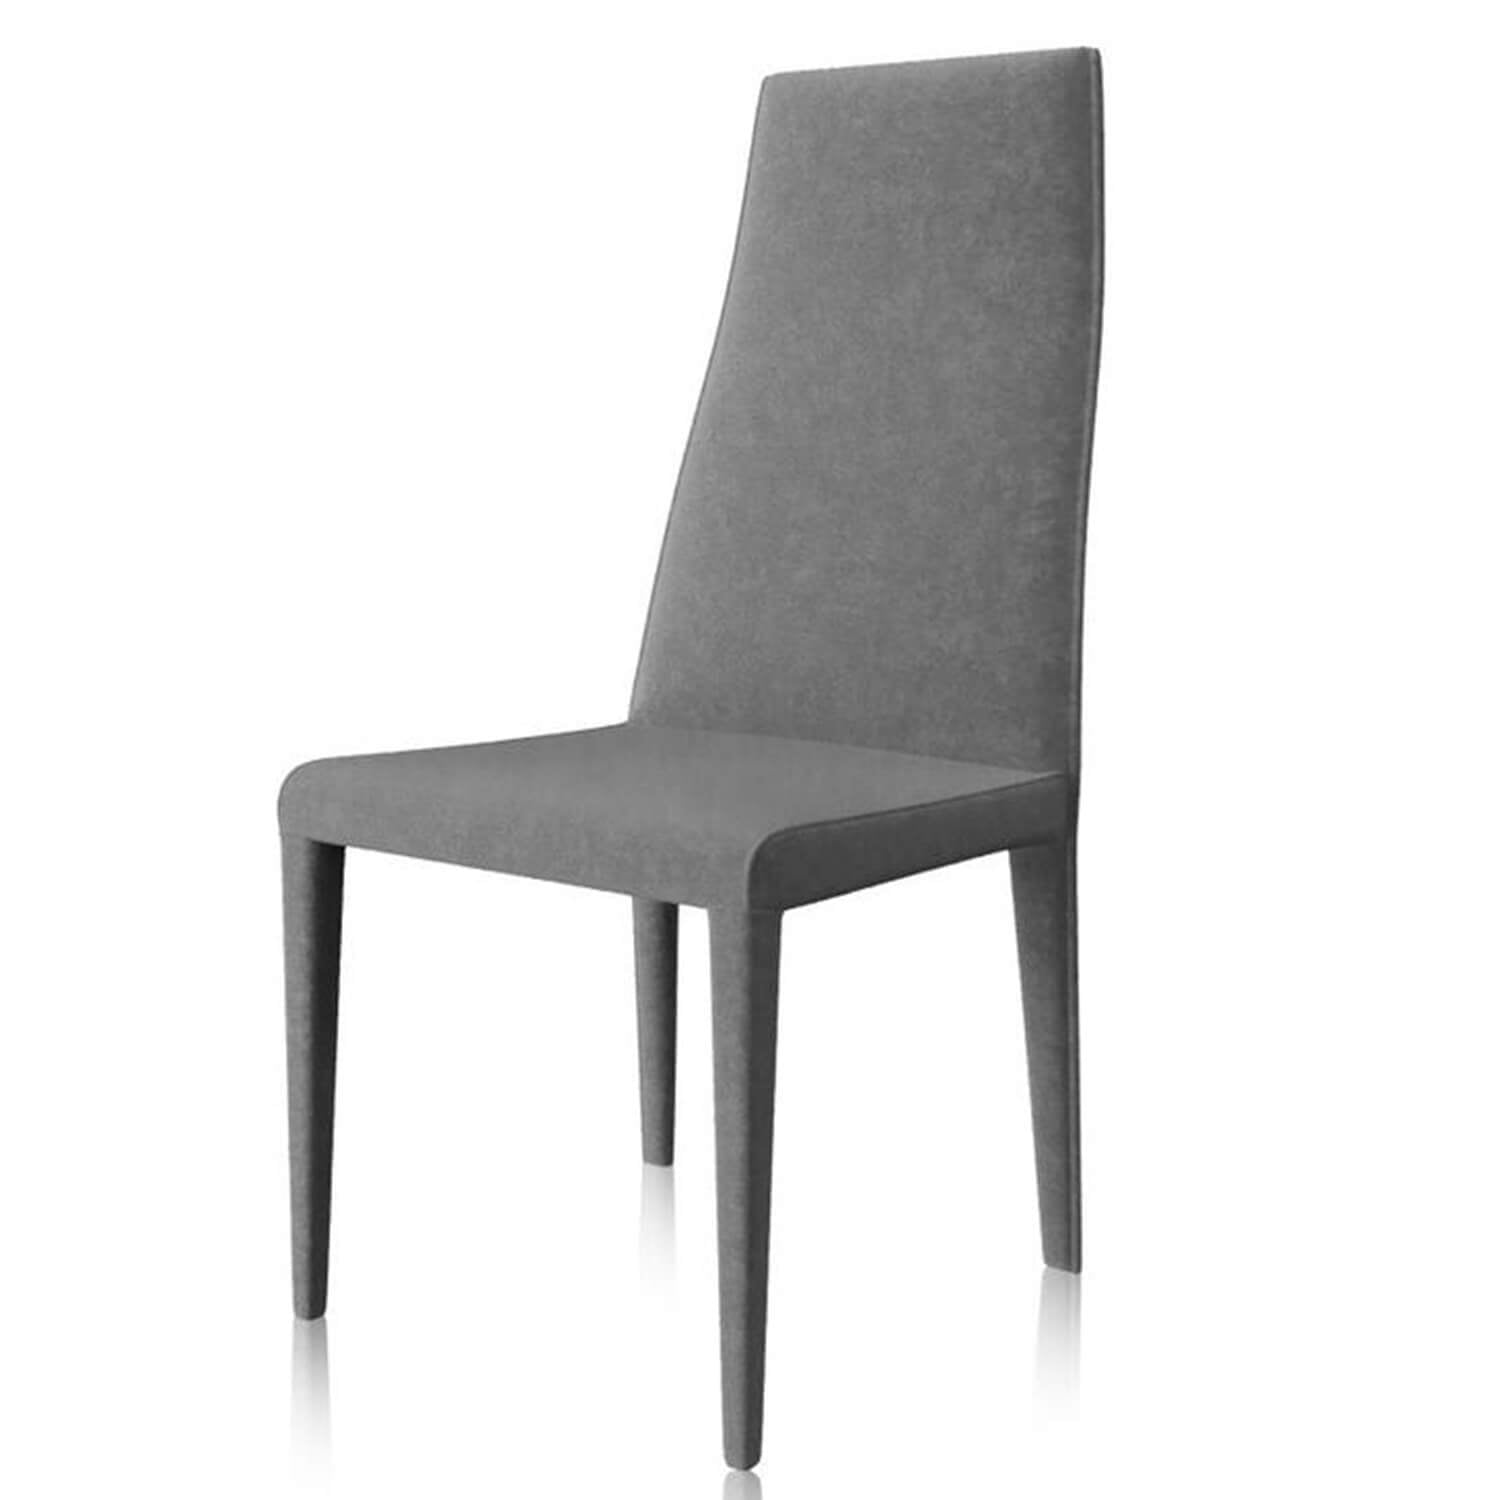 Rigano dining chair